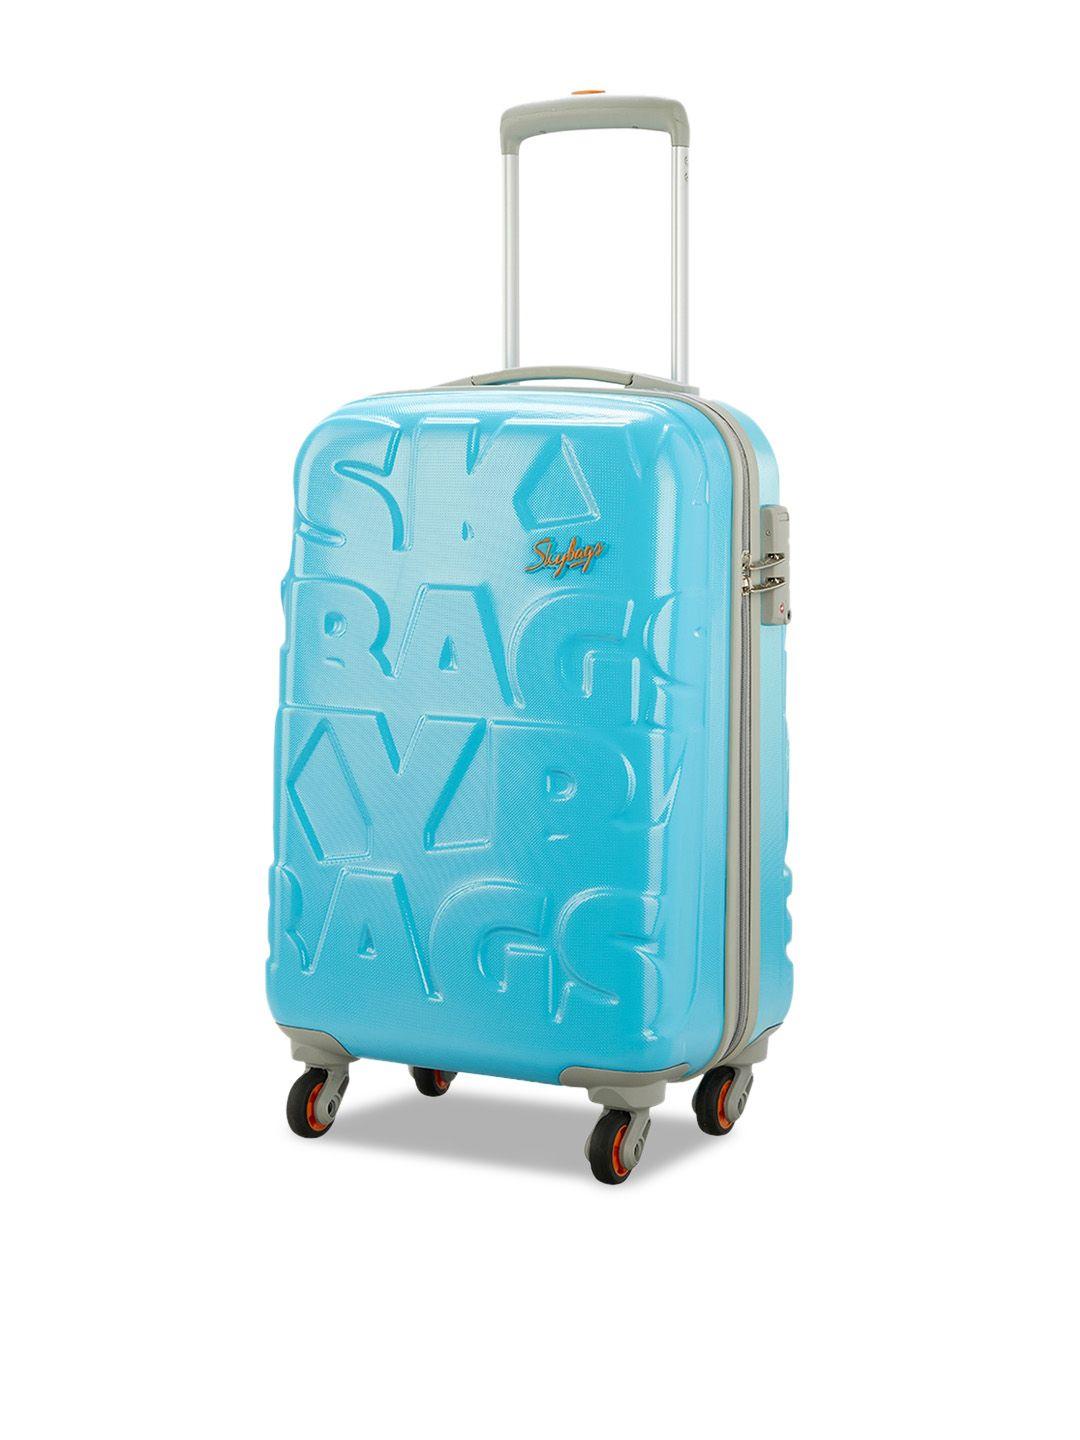 skybags-hard-sided-cabin-trolley-bag